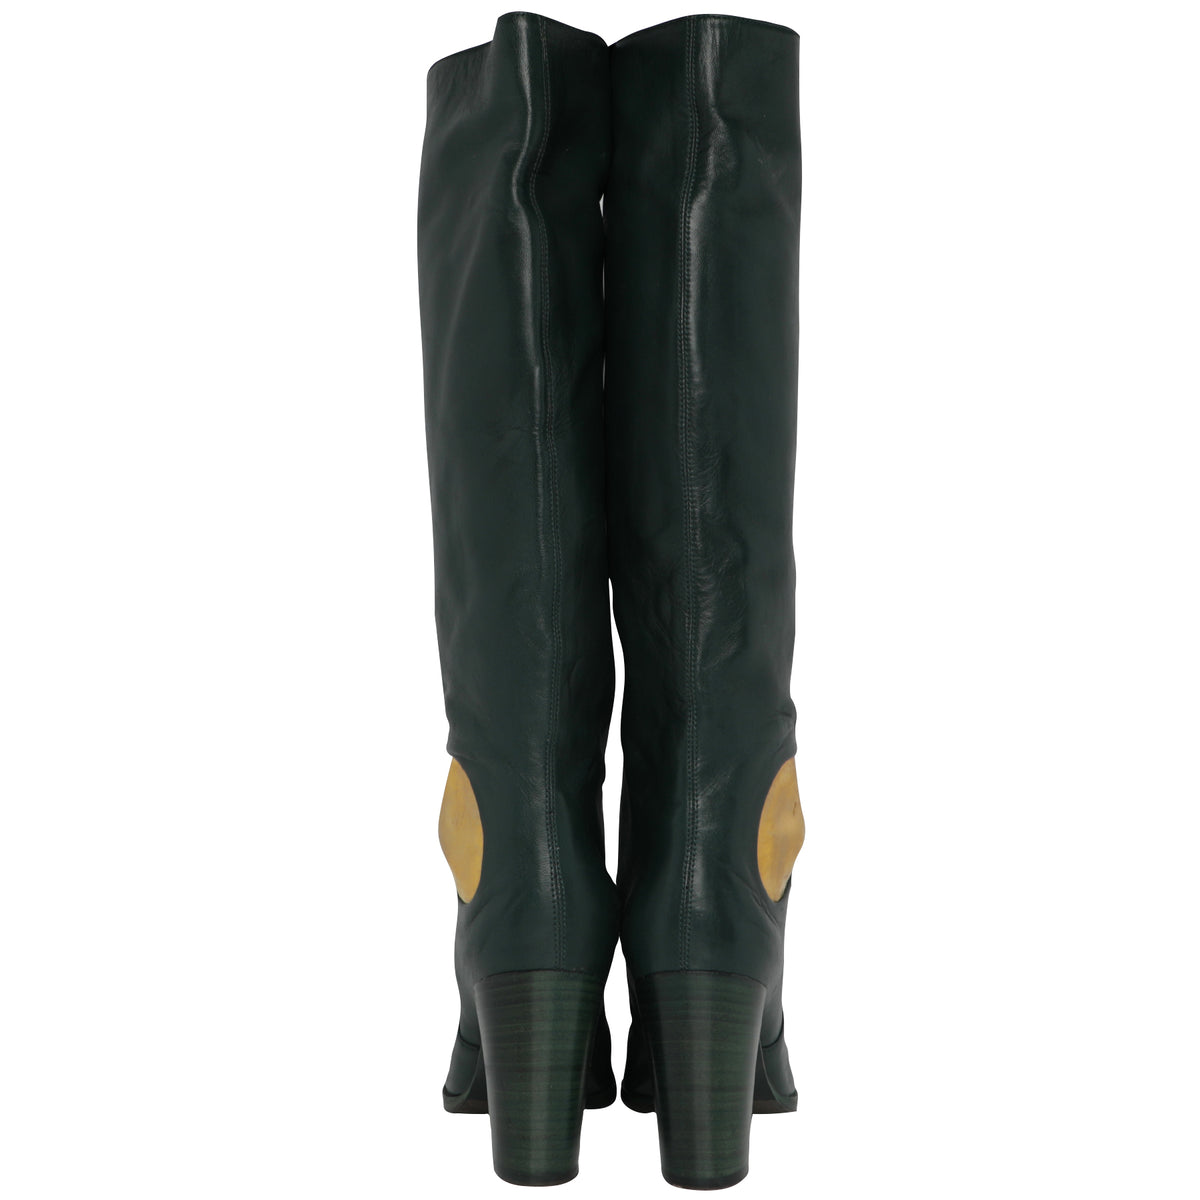 Sergio Rossi Hunter Green Smooth Leather Knee Riding Boots